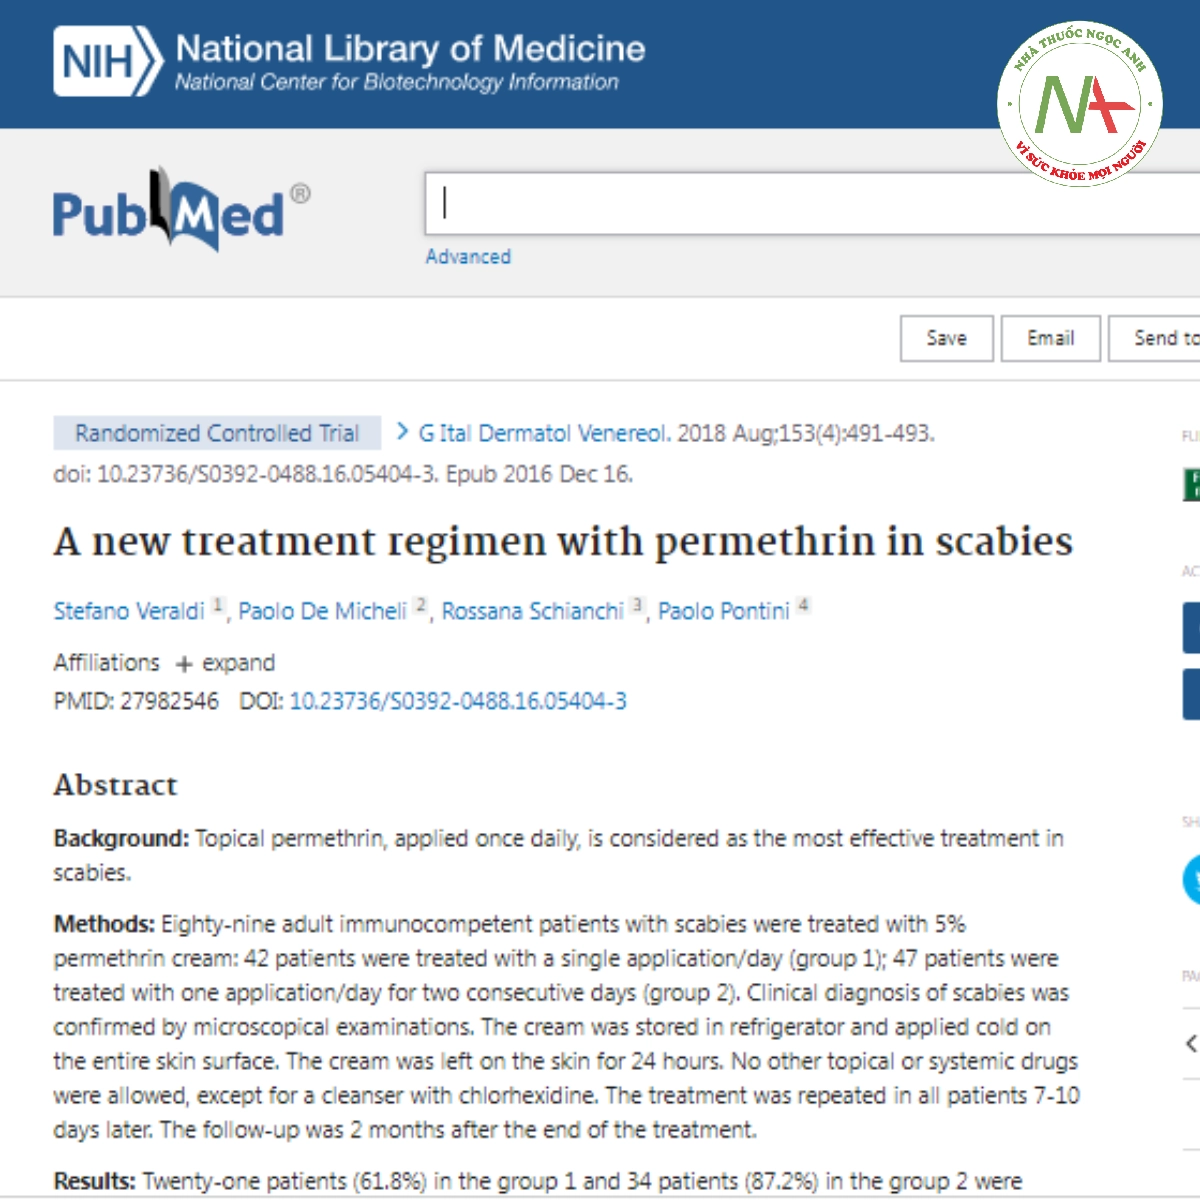 A new treatment regimen with permethrin in scabies